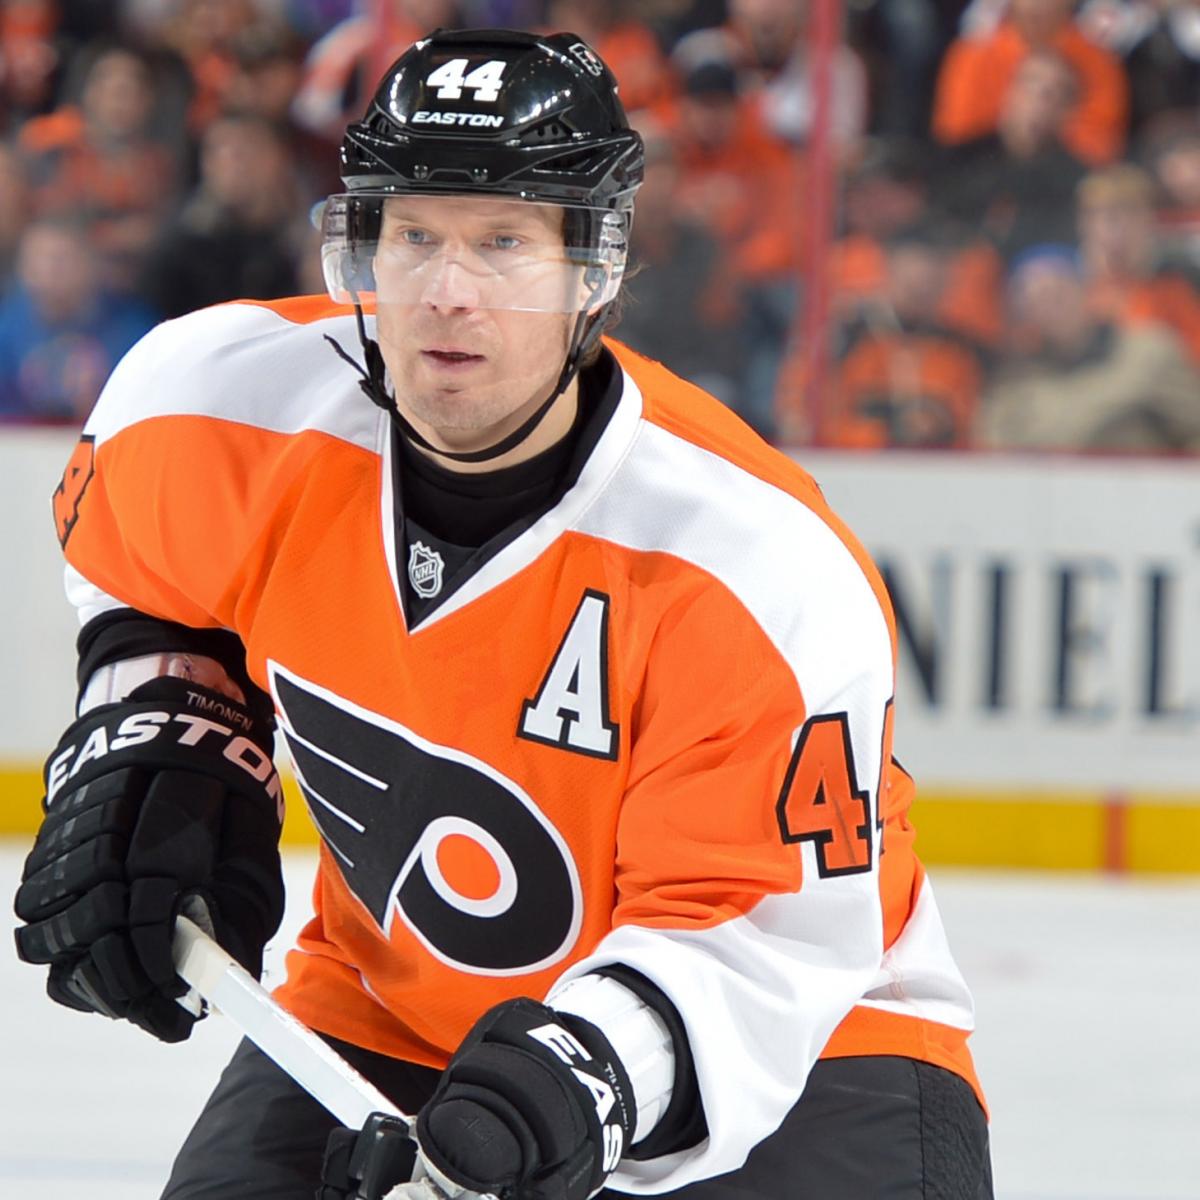 Flyers D Kimmo Timonen to resume skating 